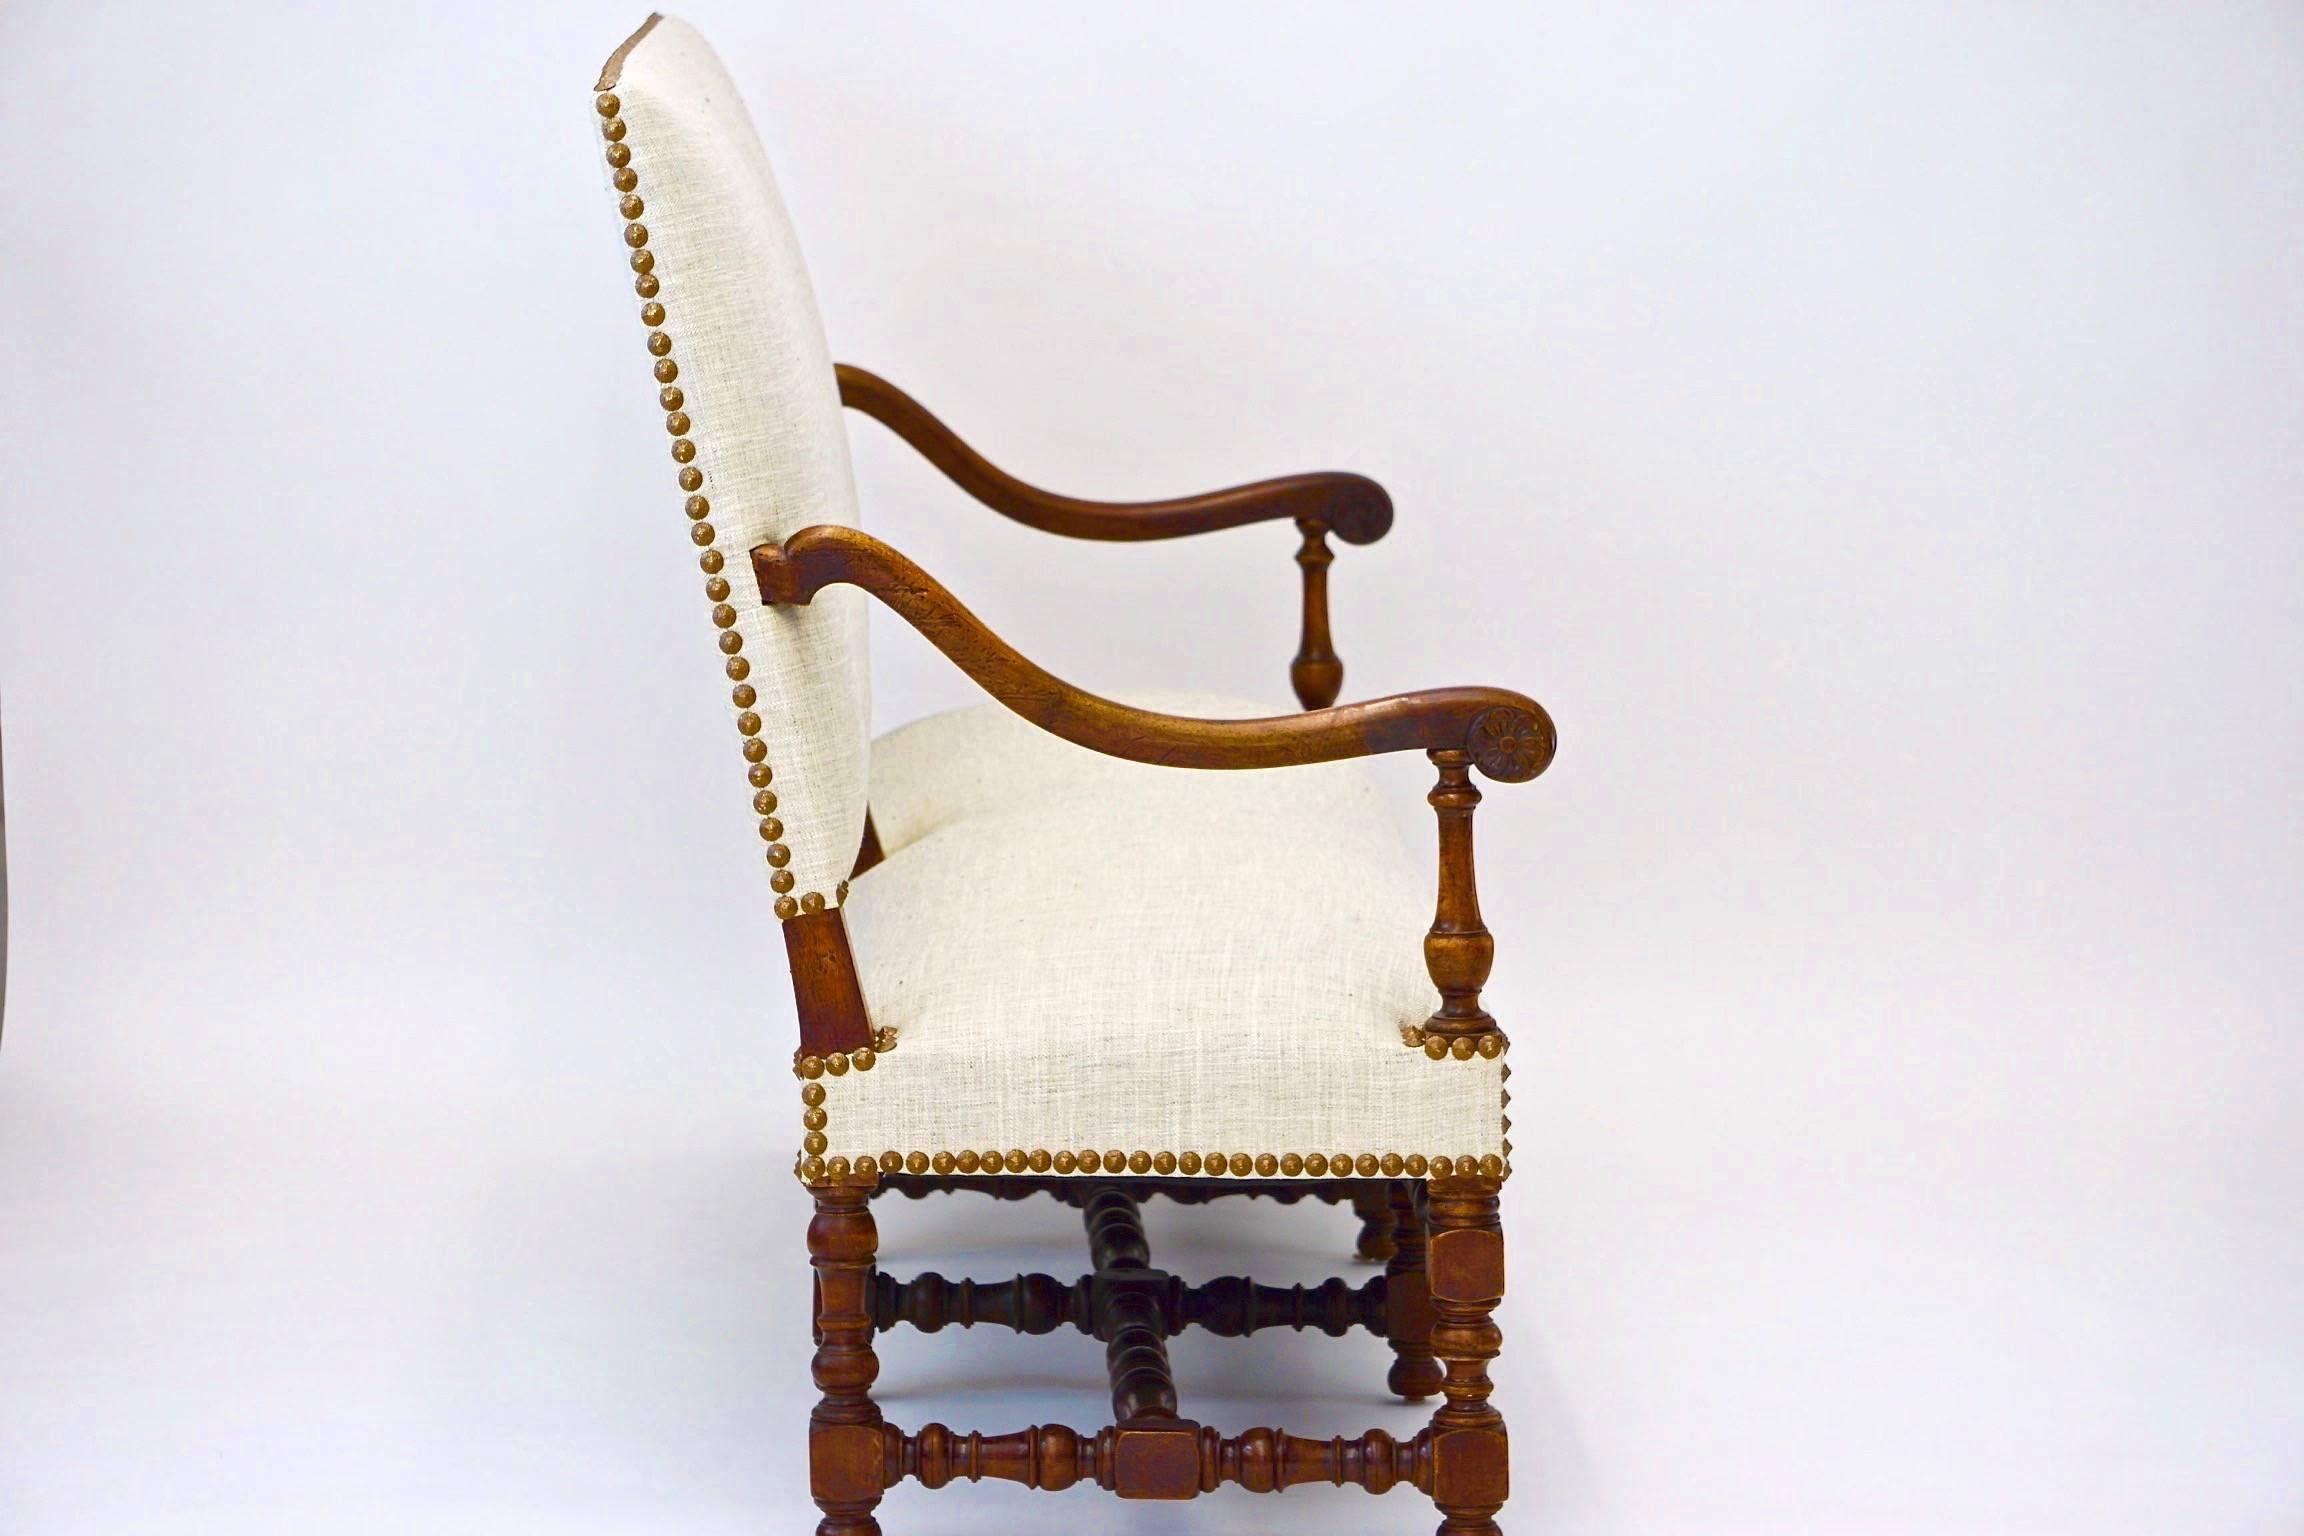 Settee or Hall Bench, Newly upholstered in cross-hatch linen, finished with large nail heads. Walnut turned stretchers, circa 1890.